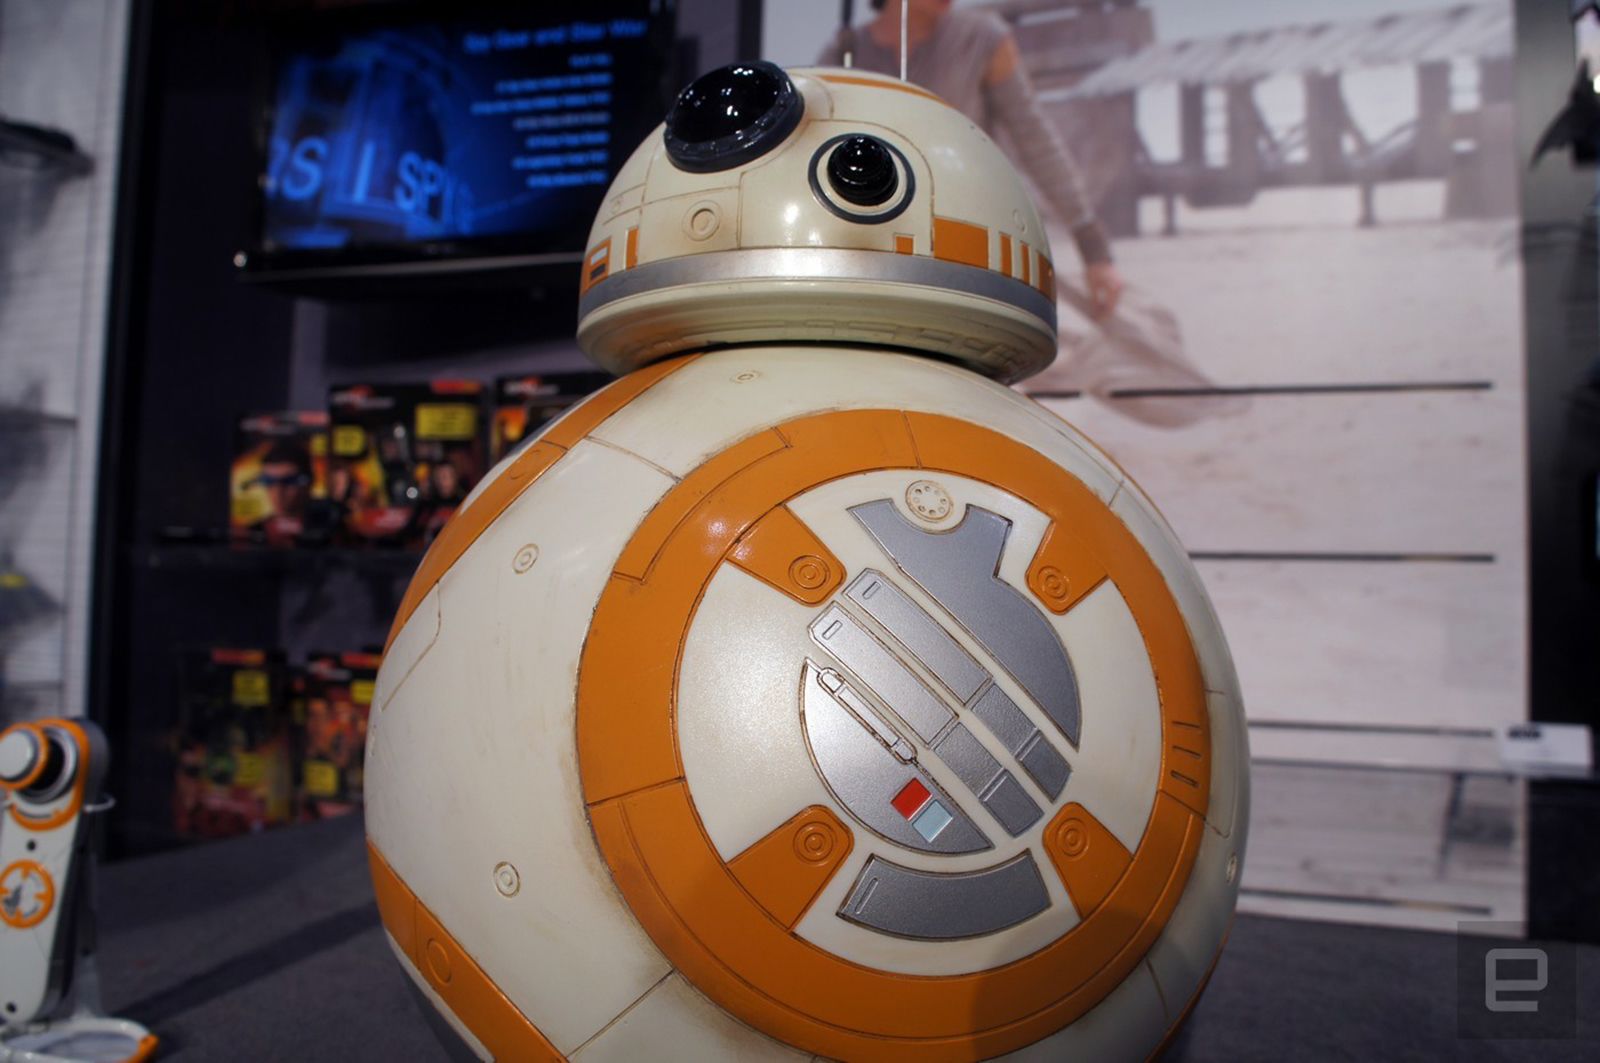 get your star wars loving hands on a life sized bb 8 that responds to voice commands image 1